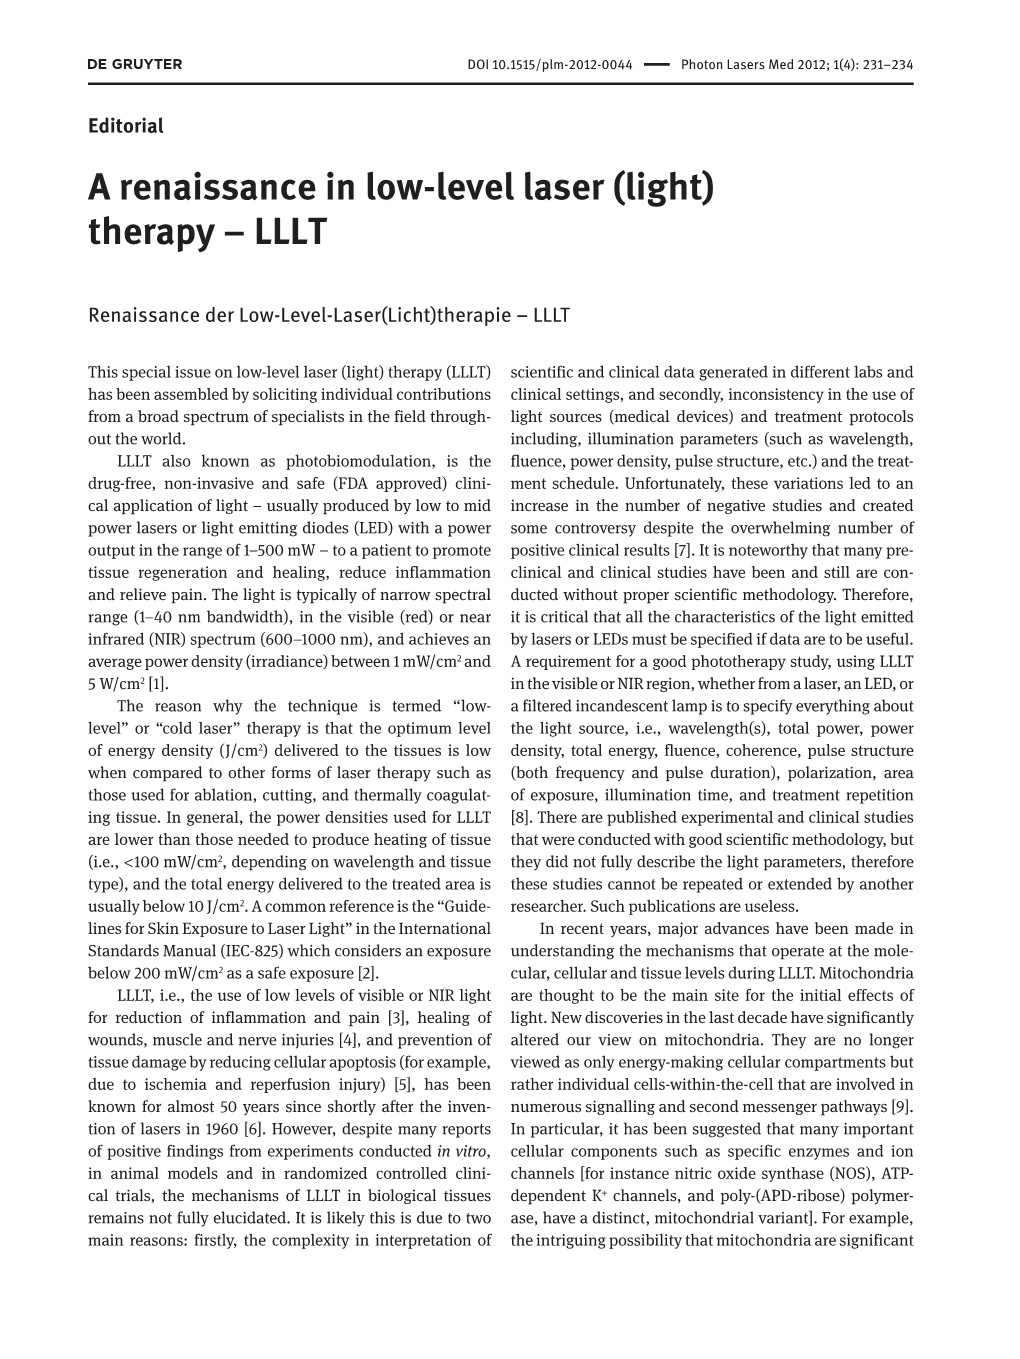 A Renaissance in Low-Level Laser (Light) Therapy – LLLT